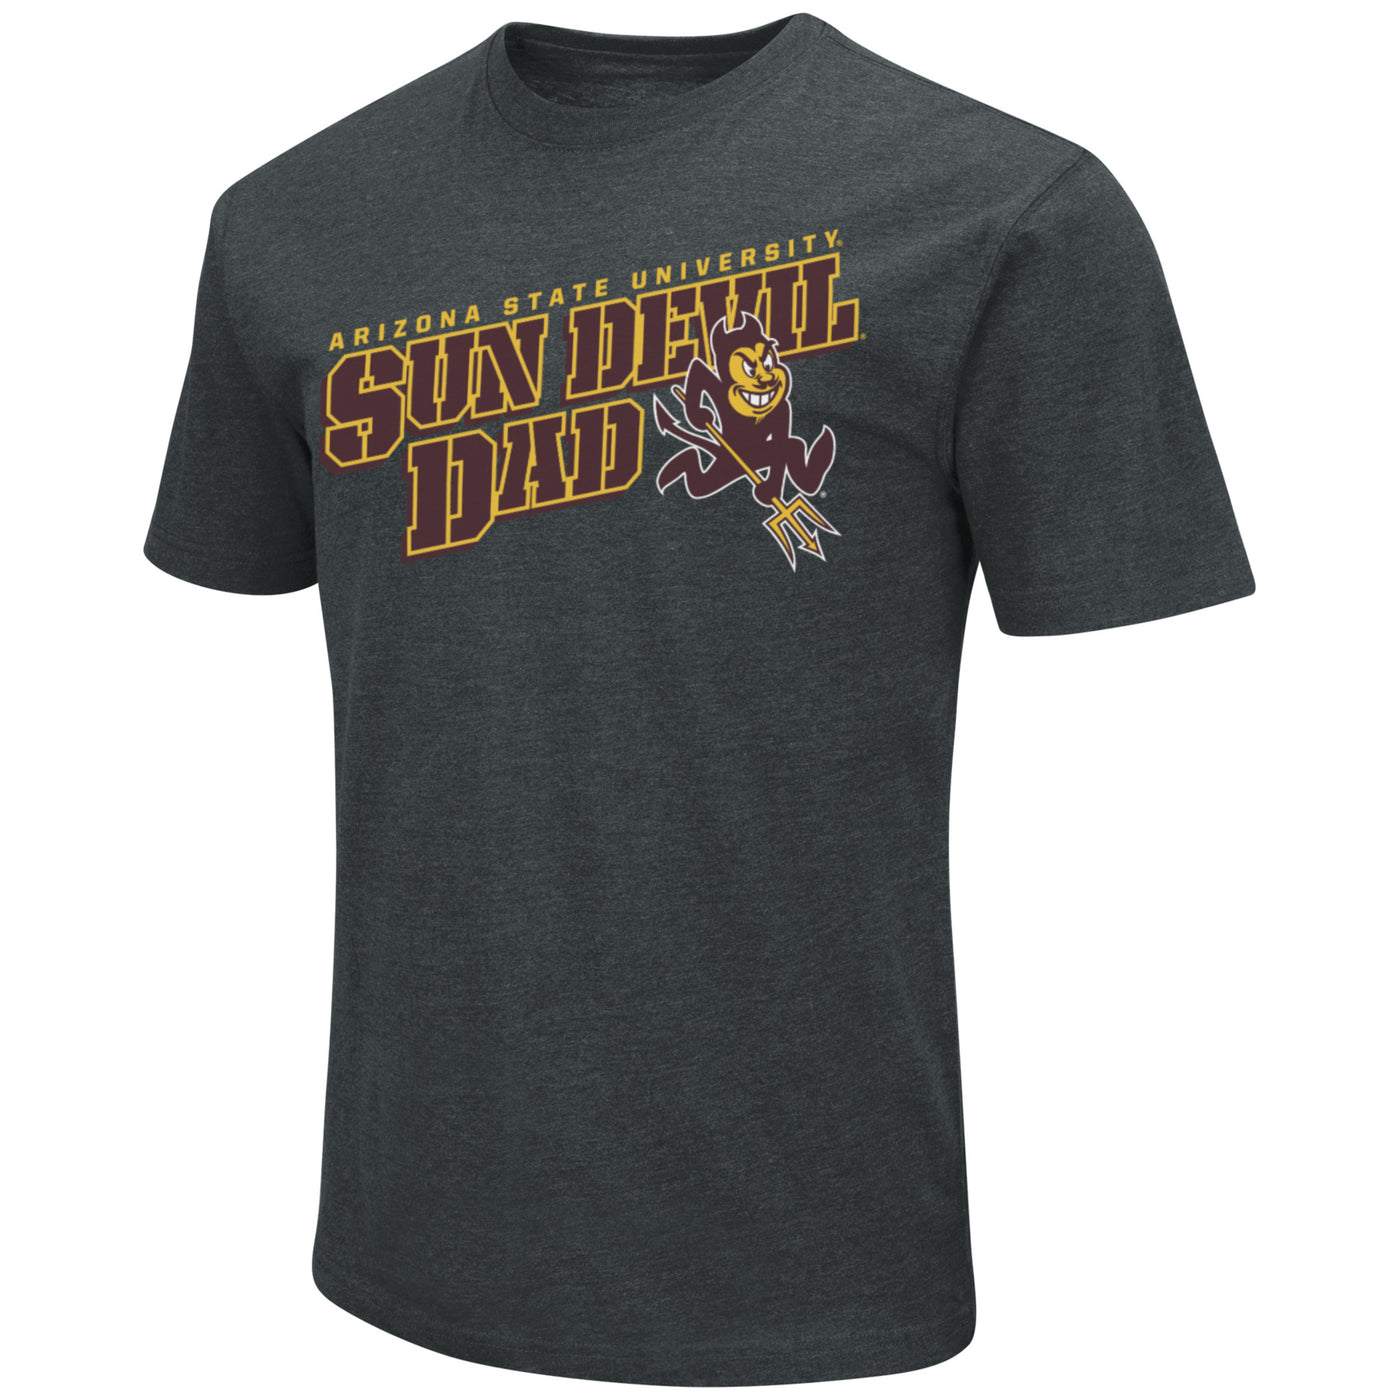 ASU black tee with 'Arizona State University' in small font above 'Sun Devils Dad' in block letters next to Sparky